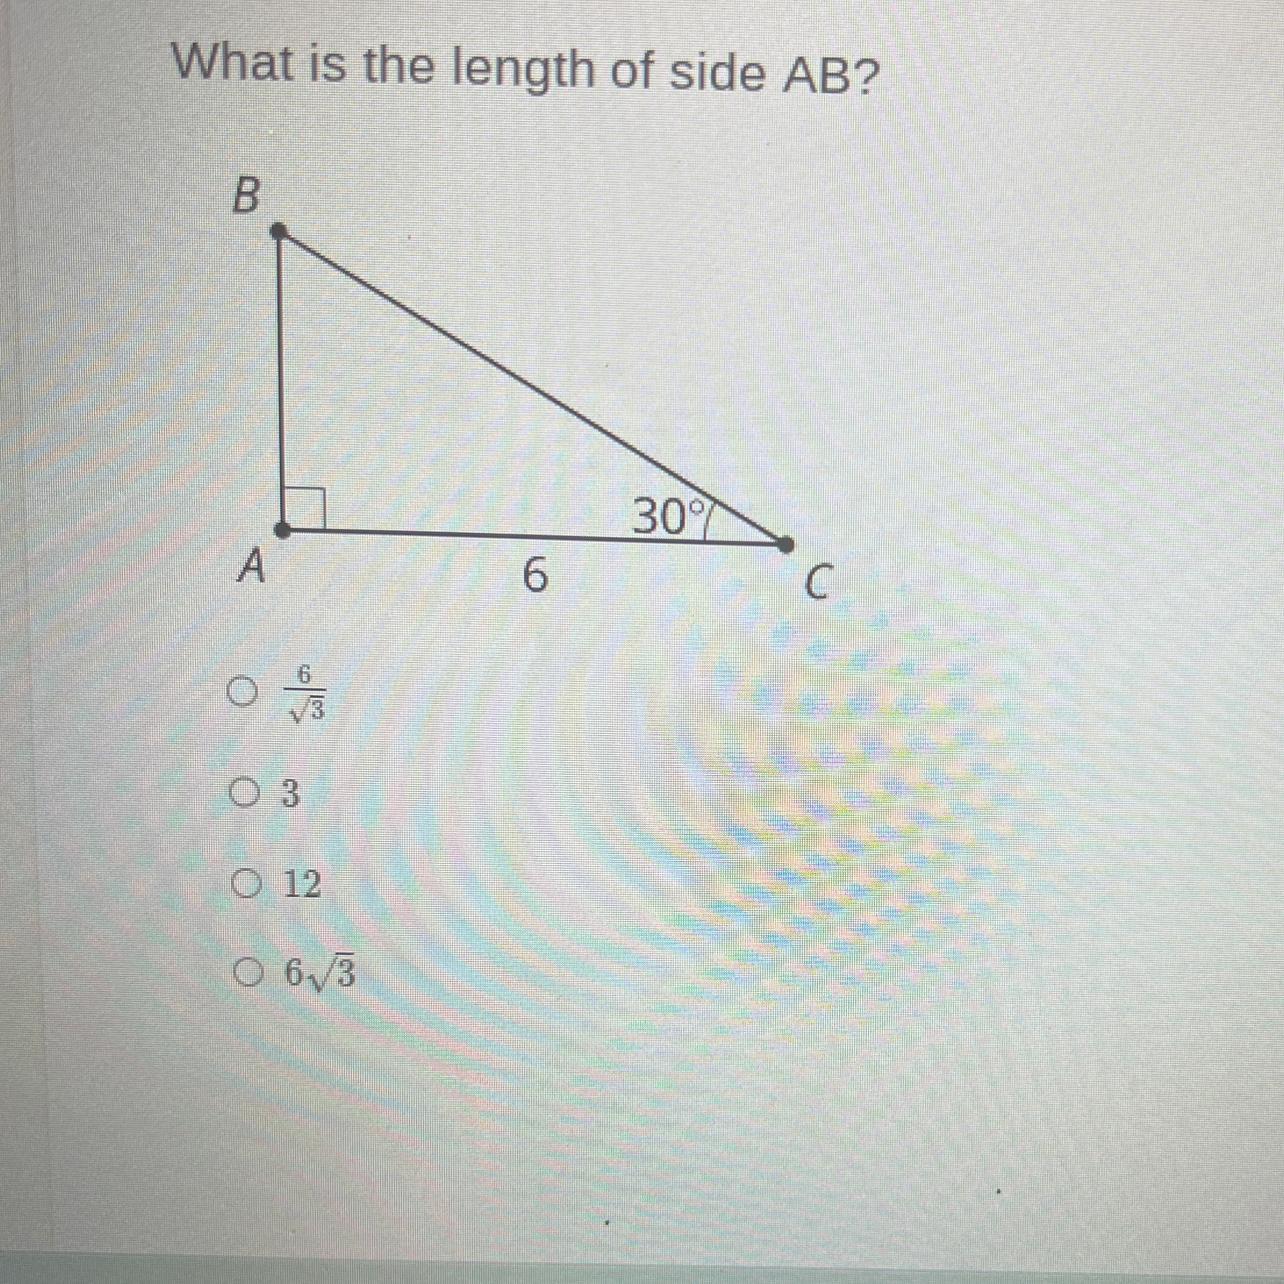 What Is The Length Of Side AB?